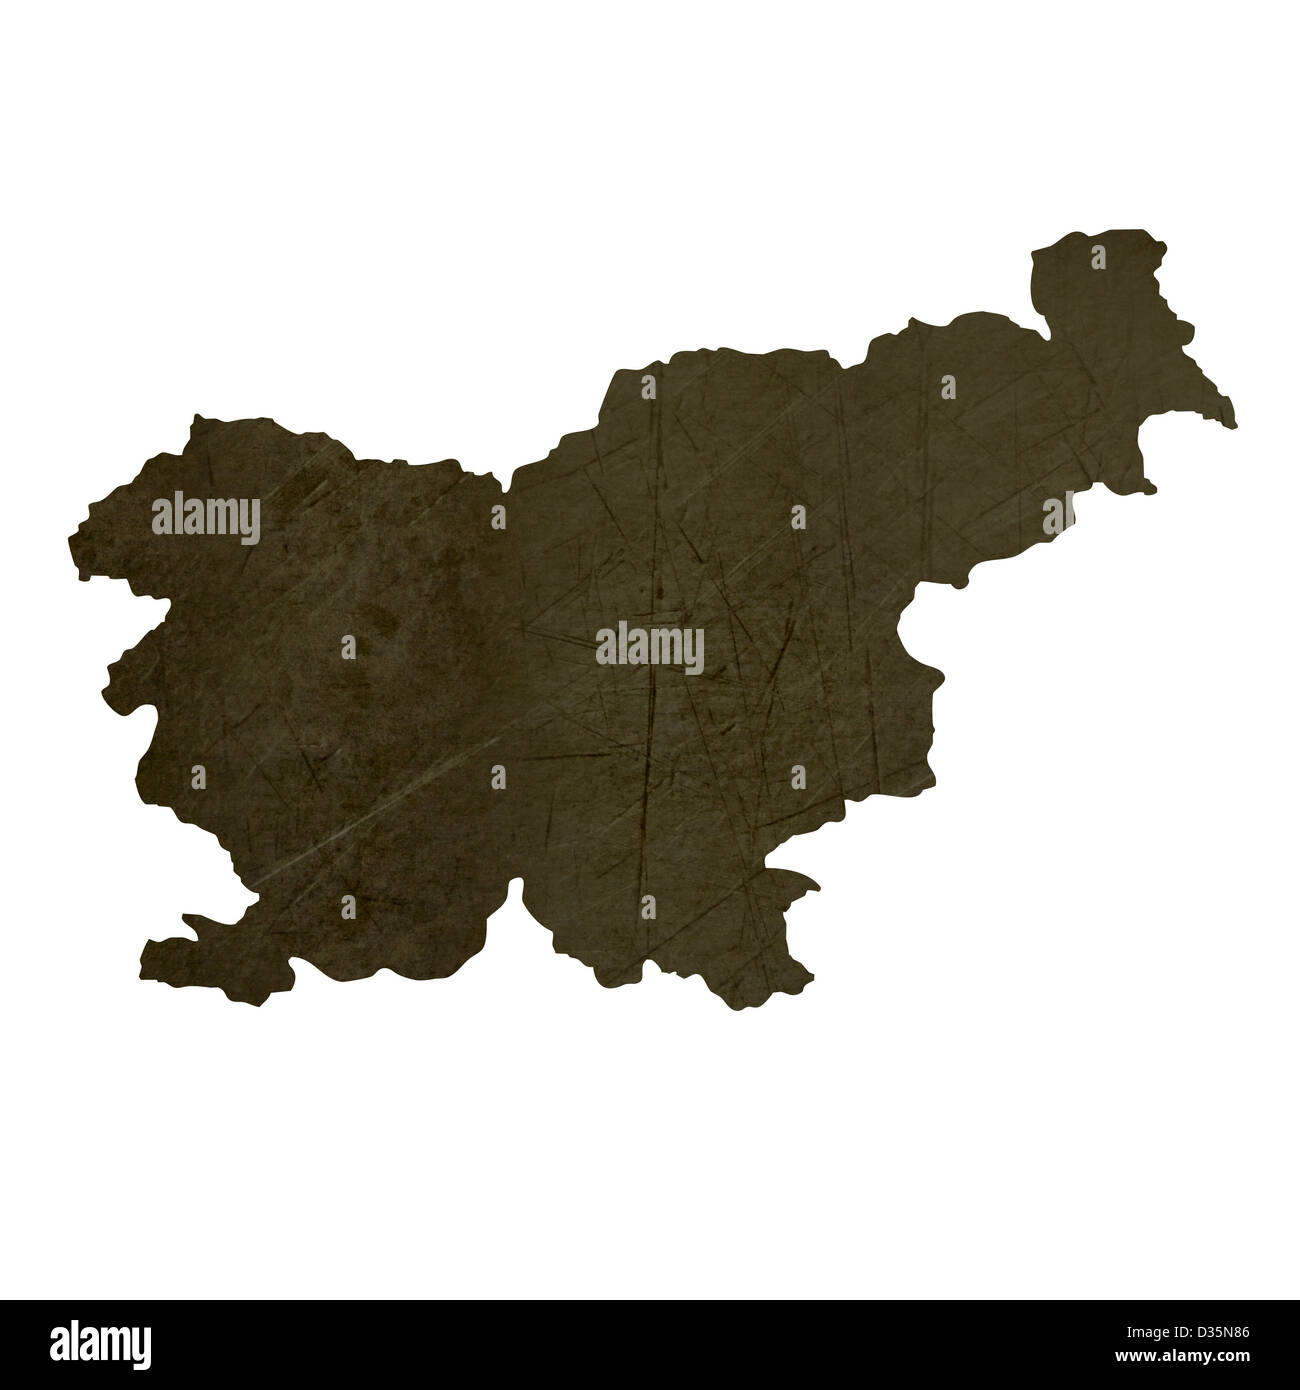 Dark silhouetted and textured map of Slovenia isolated on white background. Stock Photo